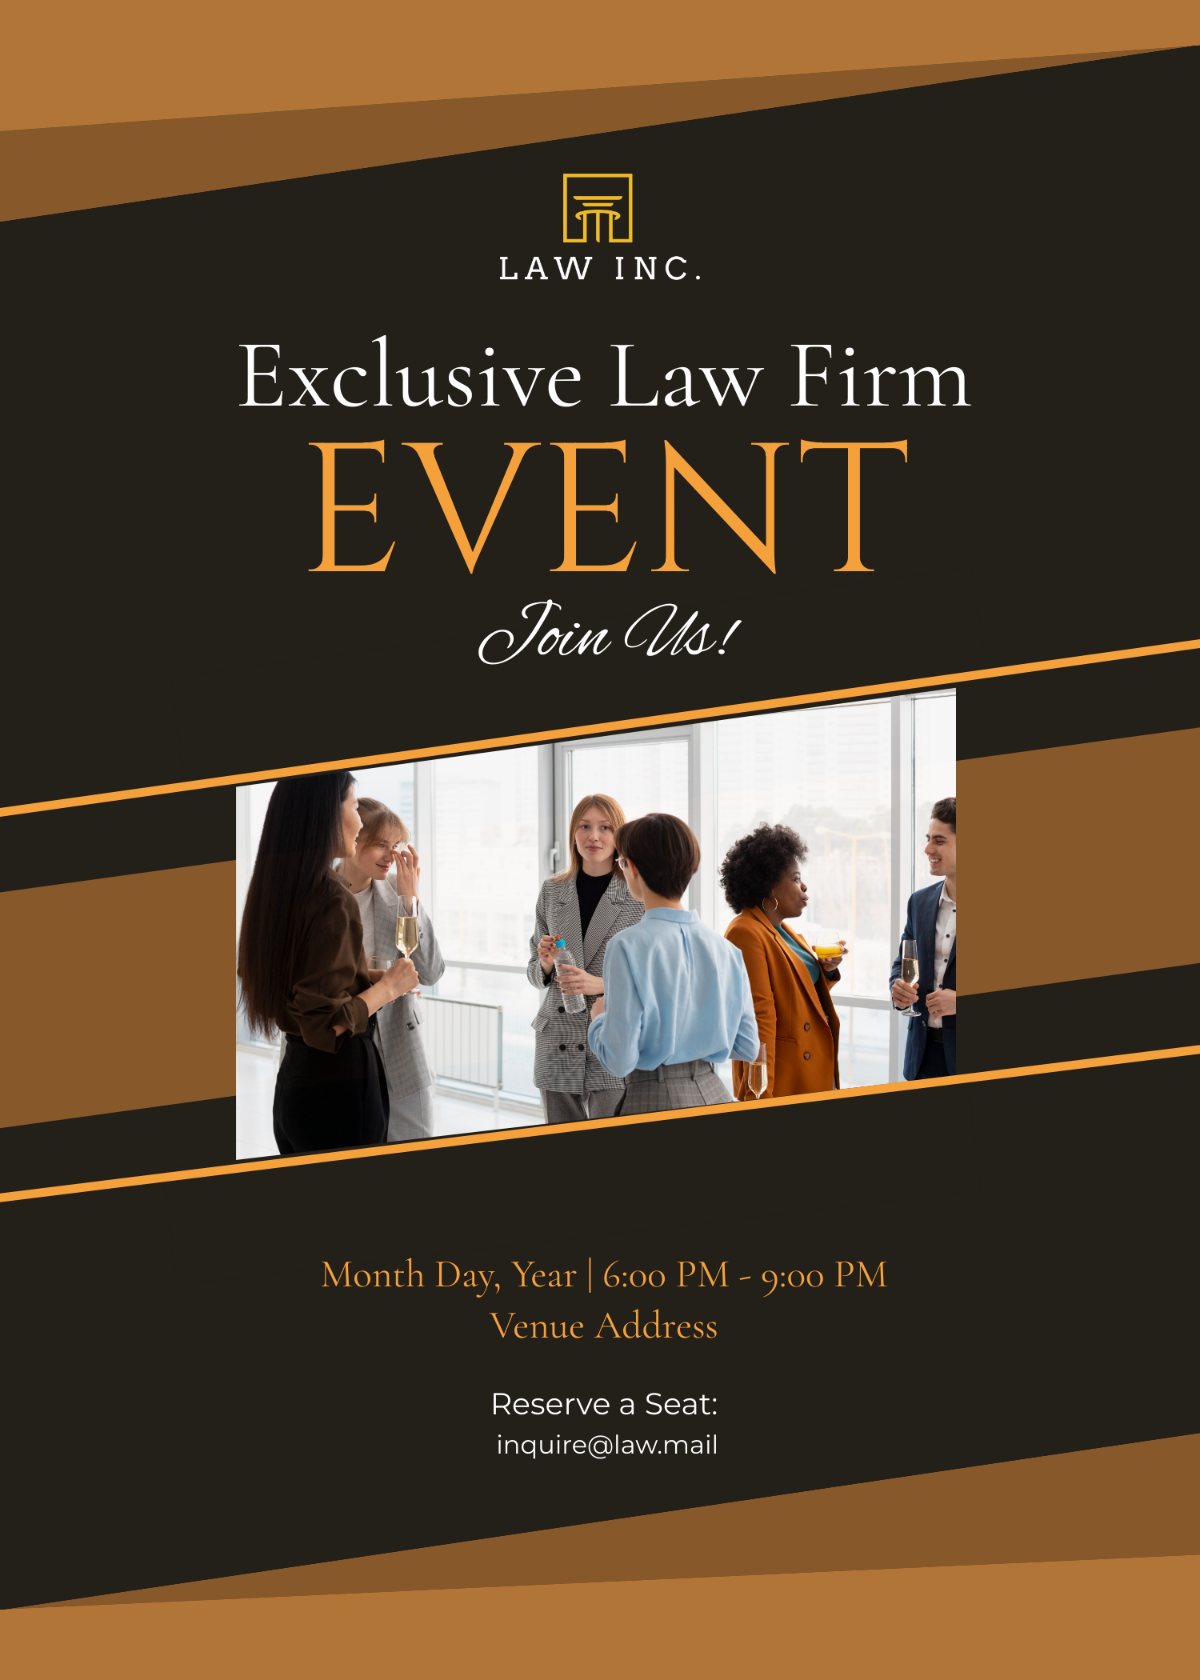 Law Firm Event Invitation